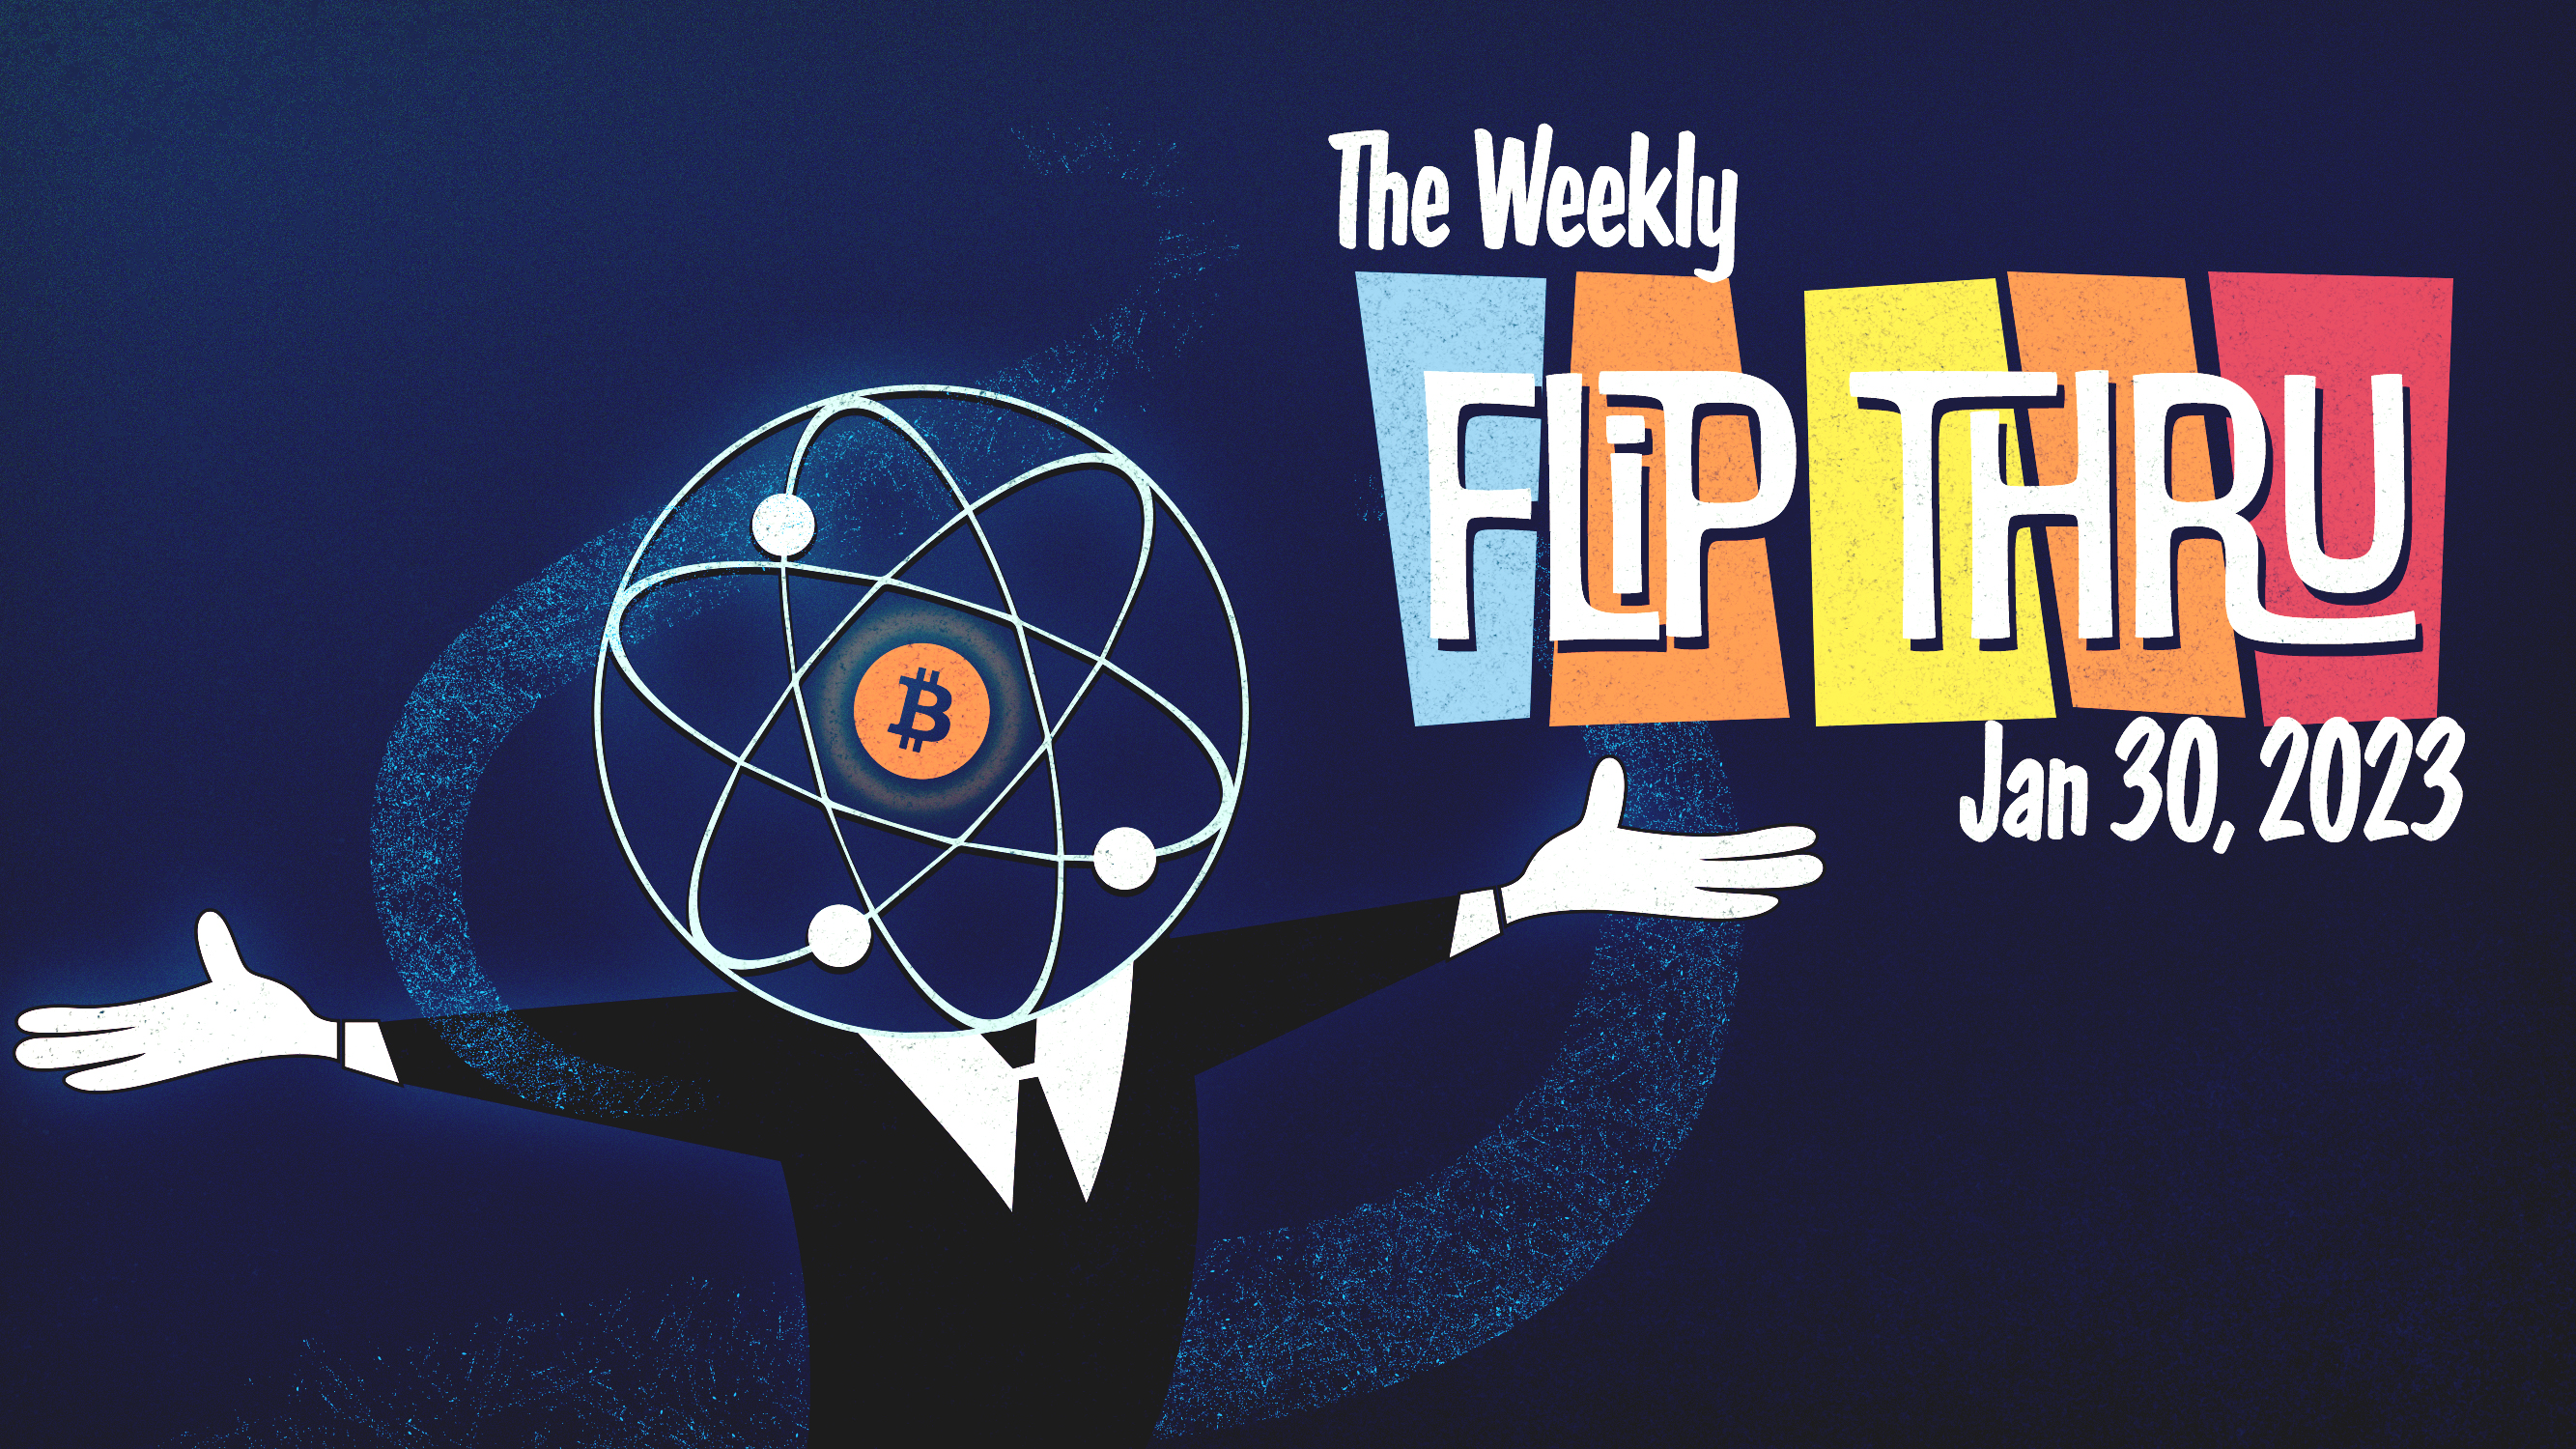 Cover Image for Weekly Flip Thru: US Gets First Nuclear-Powered Bitcoin Mine, EU Lawmakers Back Tighter Crypto Regulation for Banks